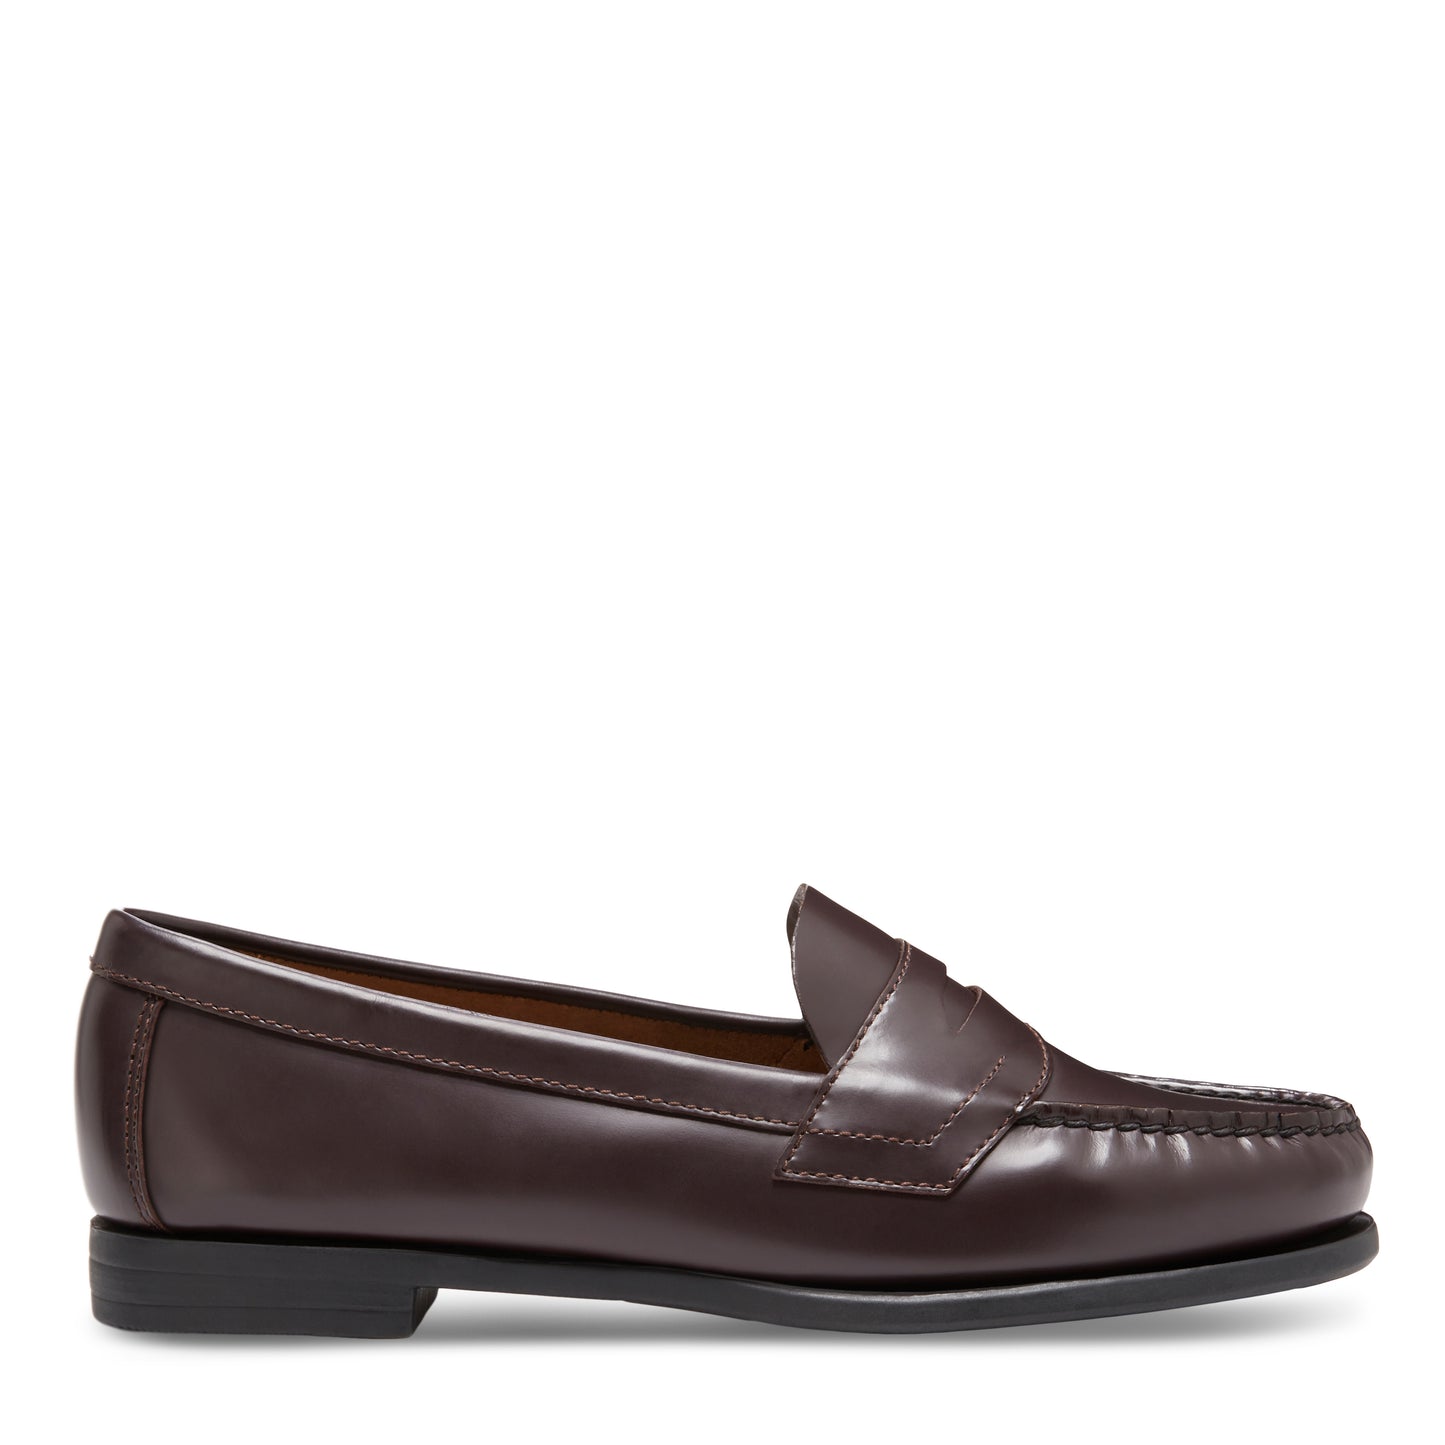 Women's Classic Penny Loafer Burgundy